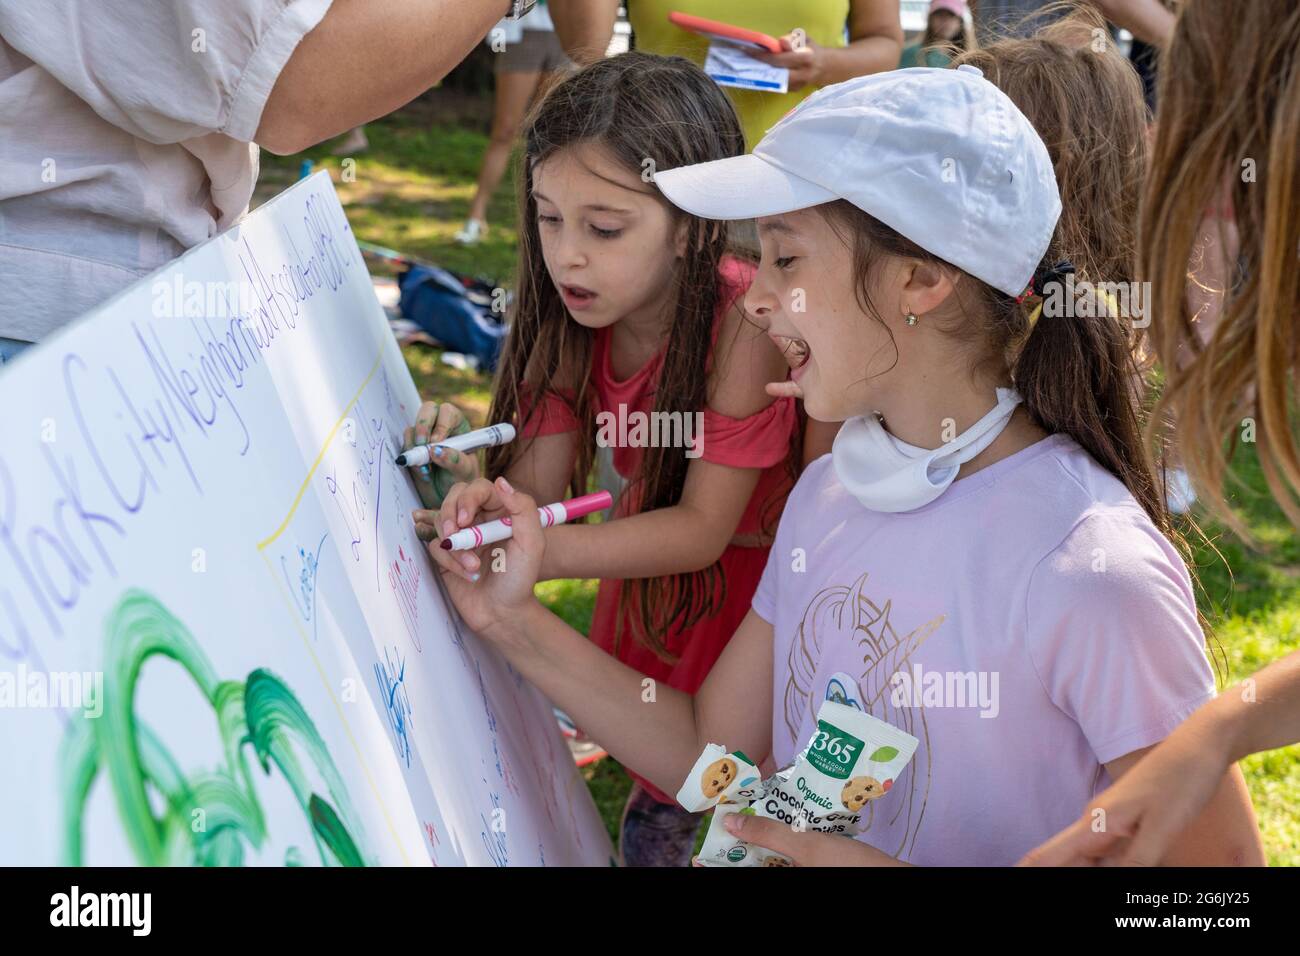 NEW YORK, NY – JULY 05: Children sign a poster calling to save the park during a rally in Rockefeller Park to protest Gov. Andrew Cuomo's plans for a Stock Photo